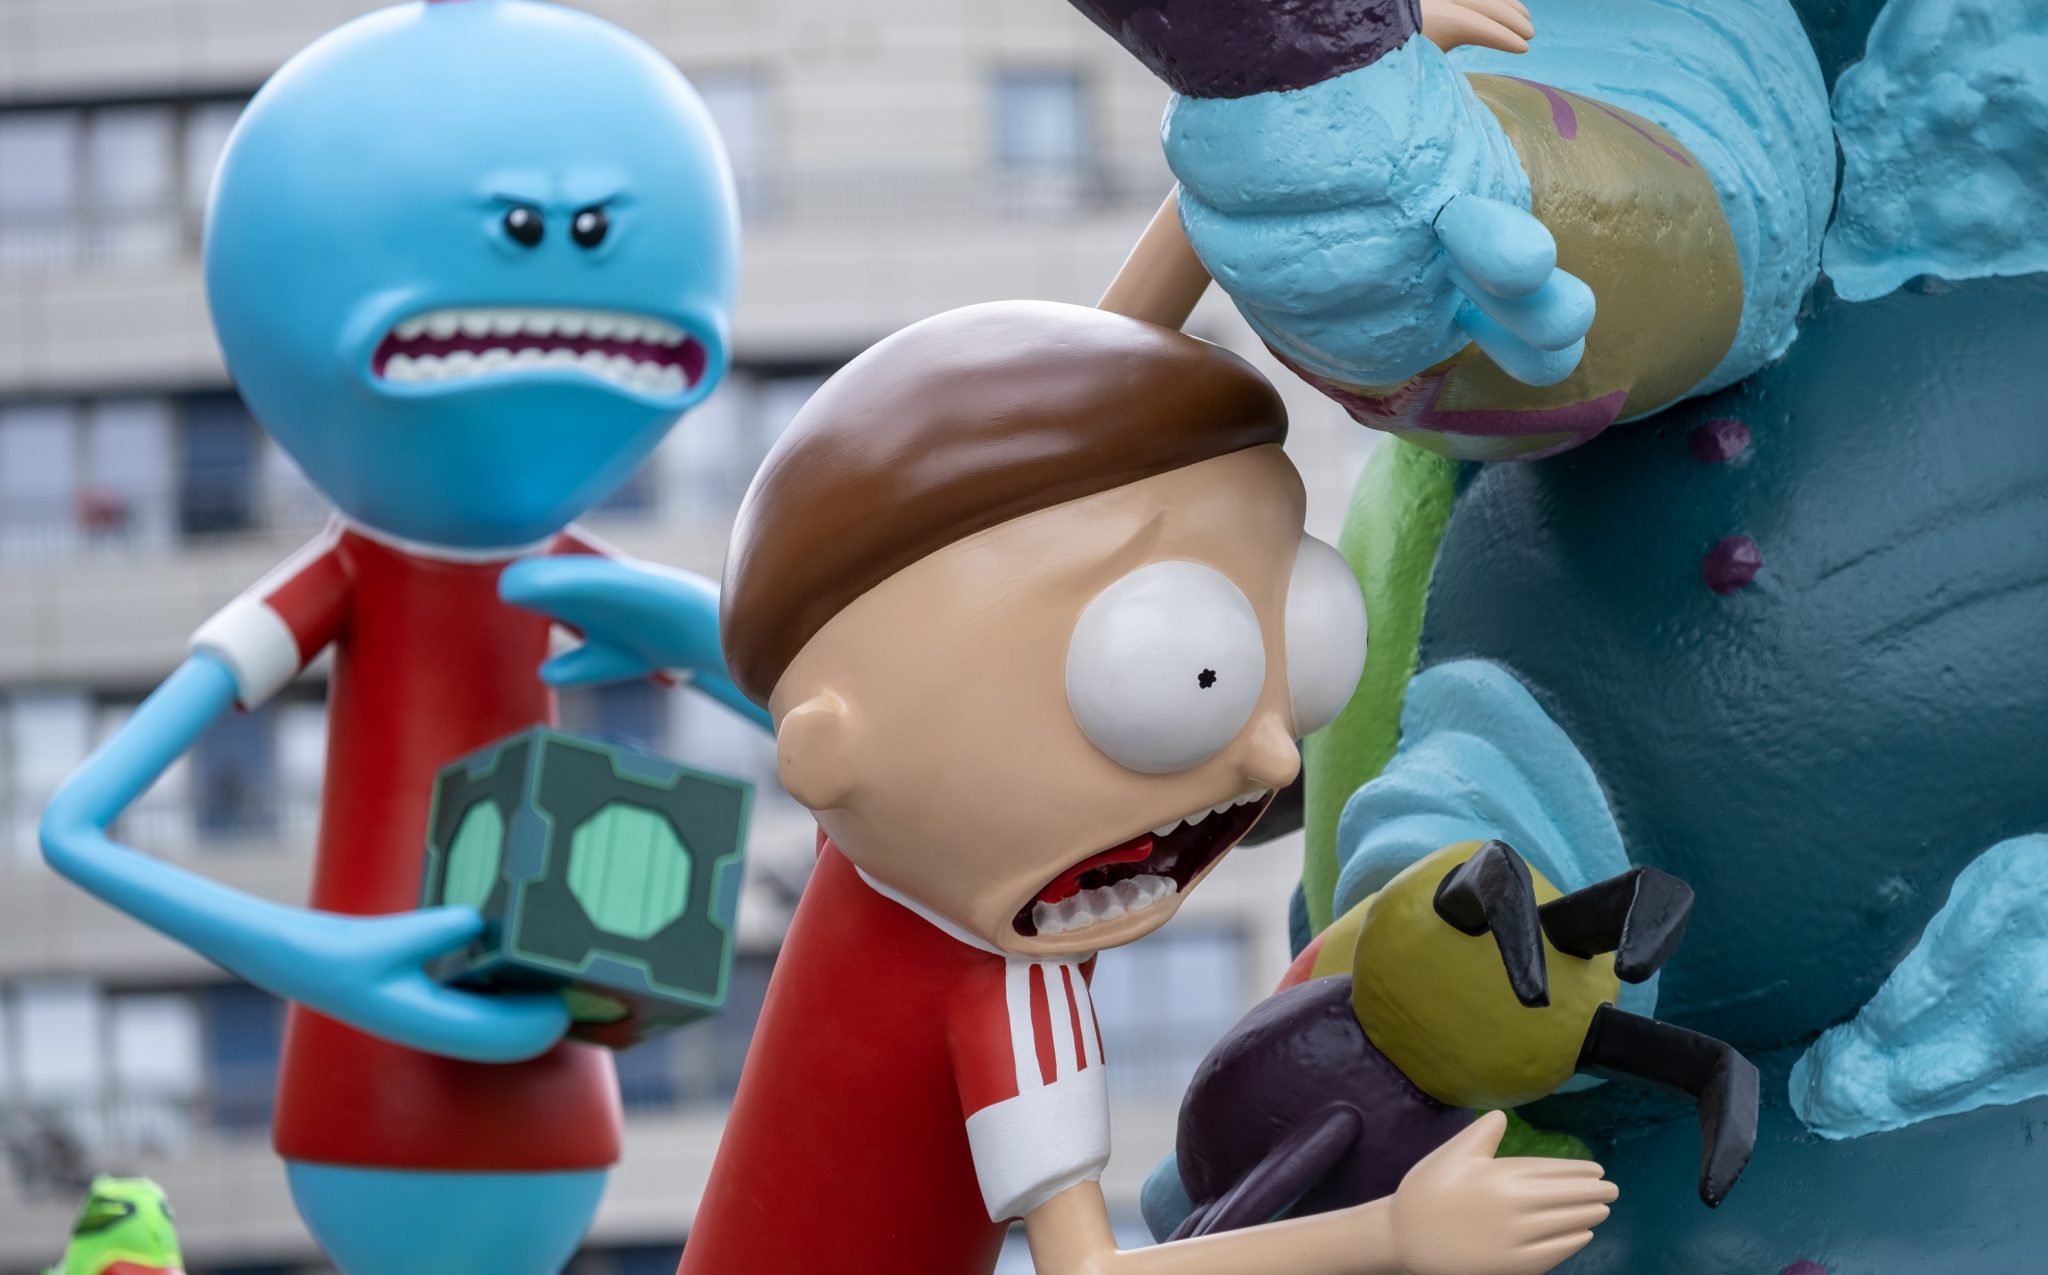 A close-up of 2 Rick and Morty characters looking shocked